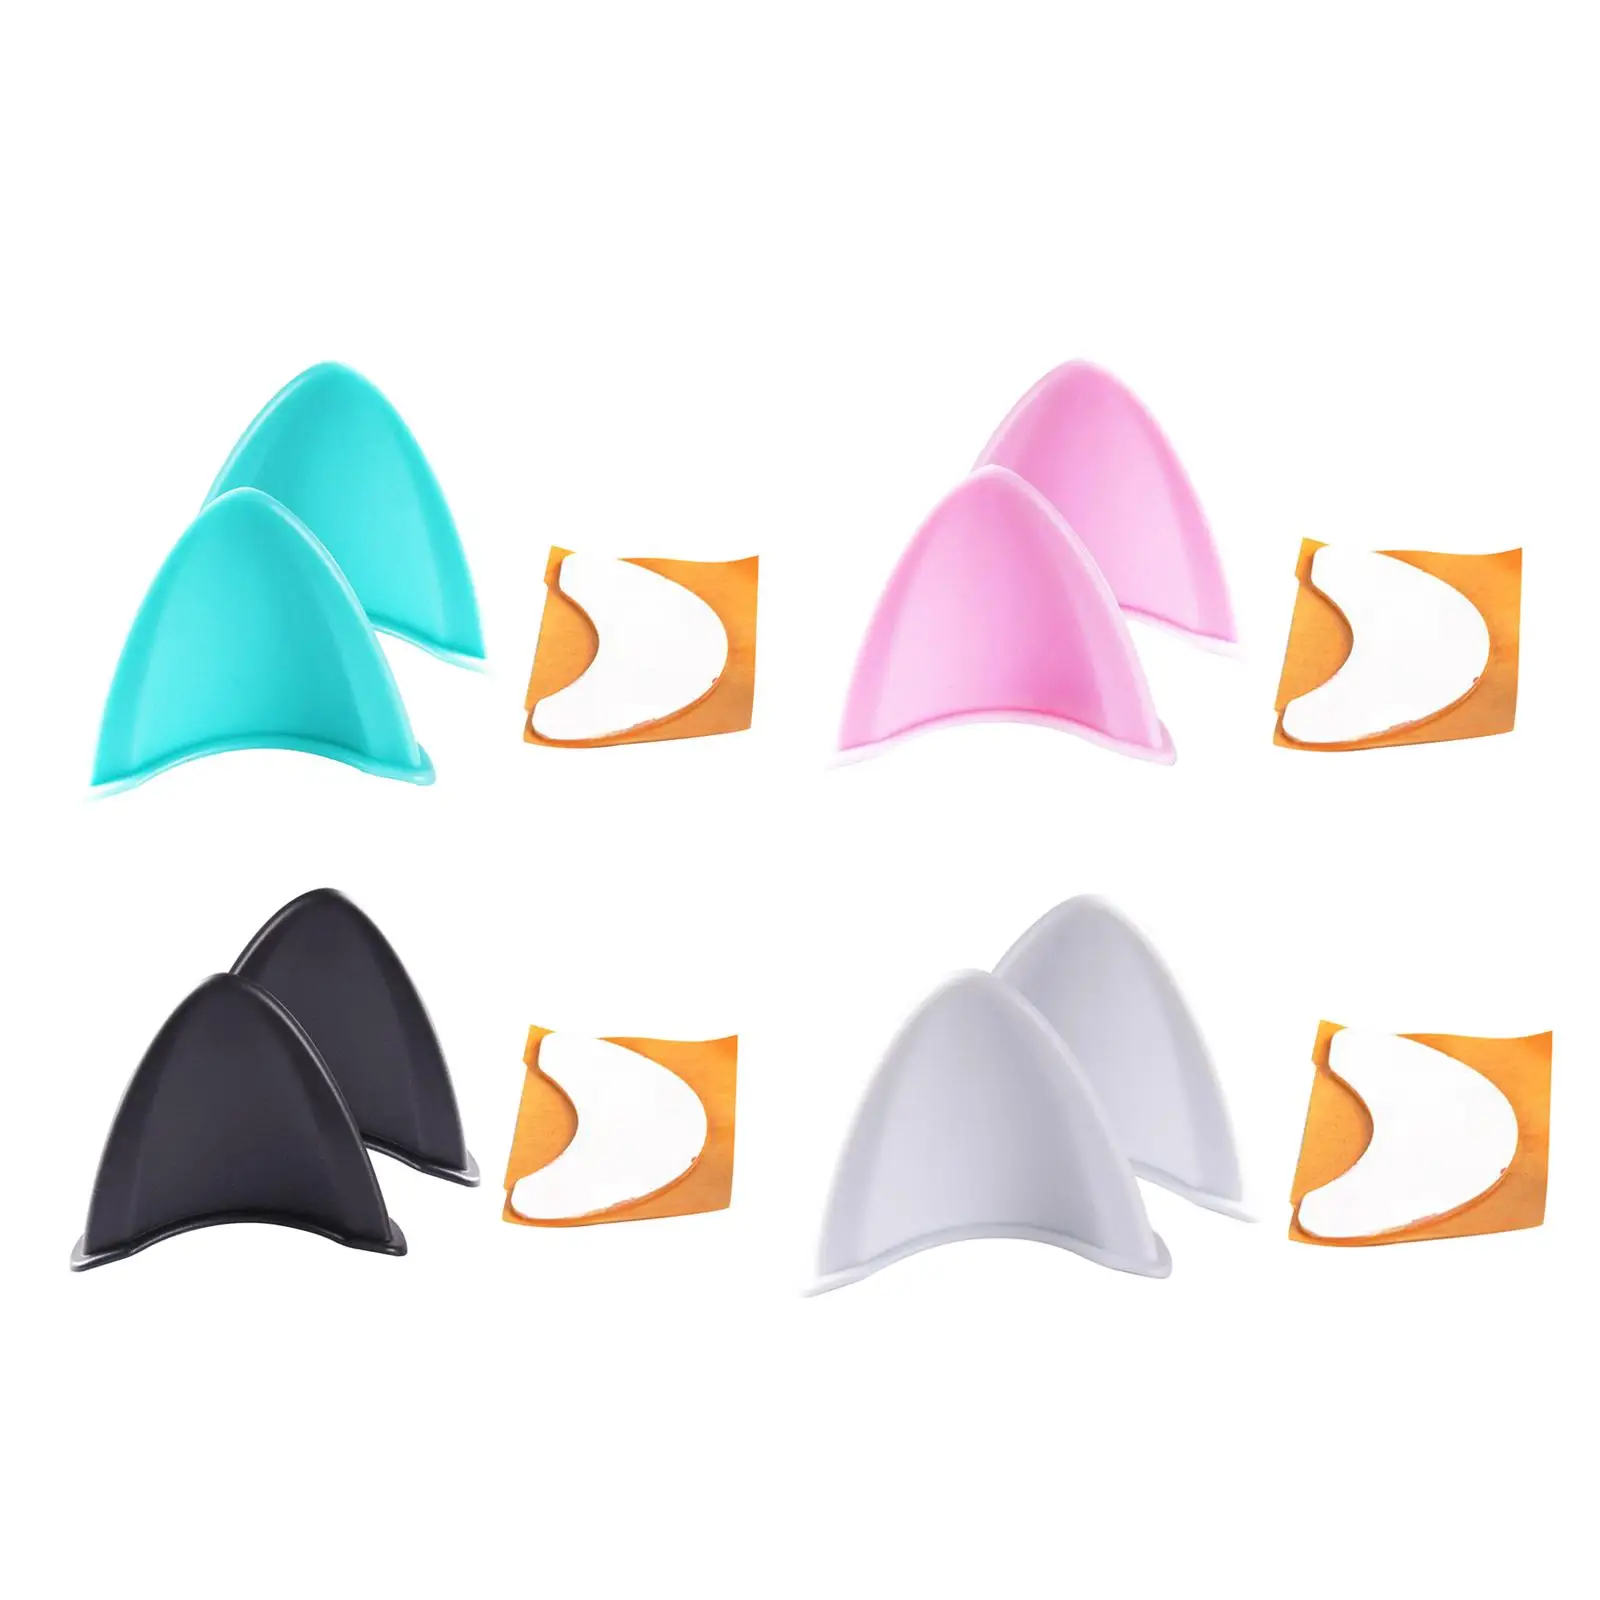 Helmet Cat Ears Accessory Interchangeable Adhesive Decoration for Motorcycle Helmets Bike Ski Scooter (Helmet Not Included)